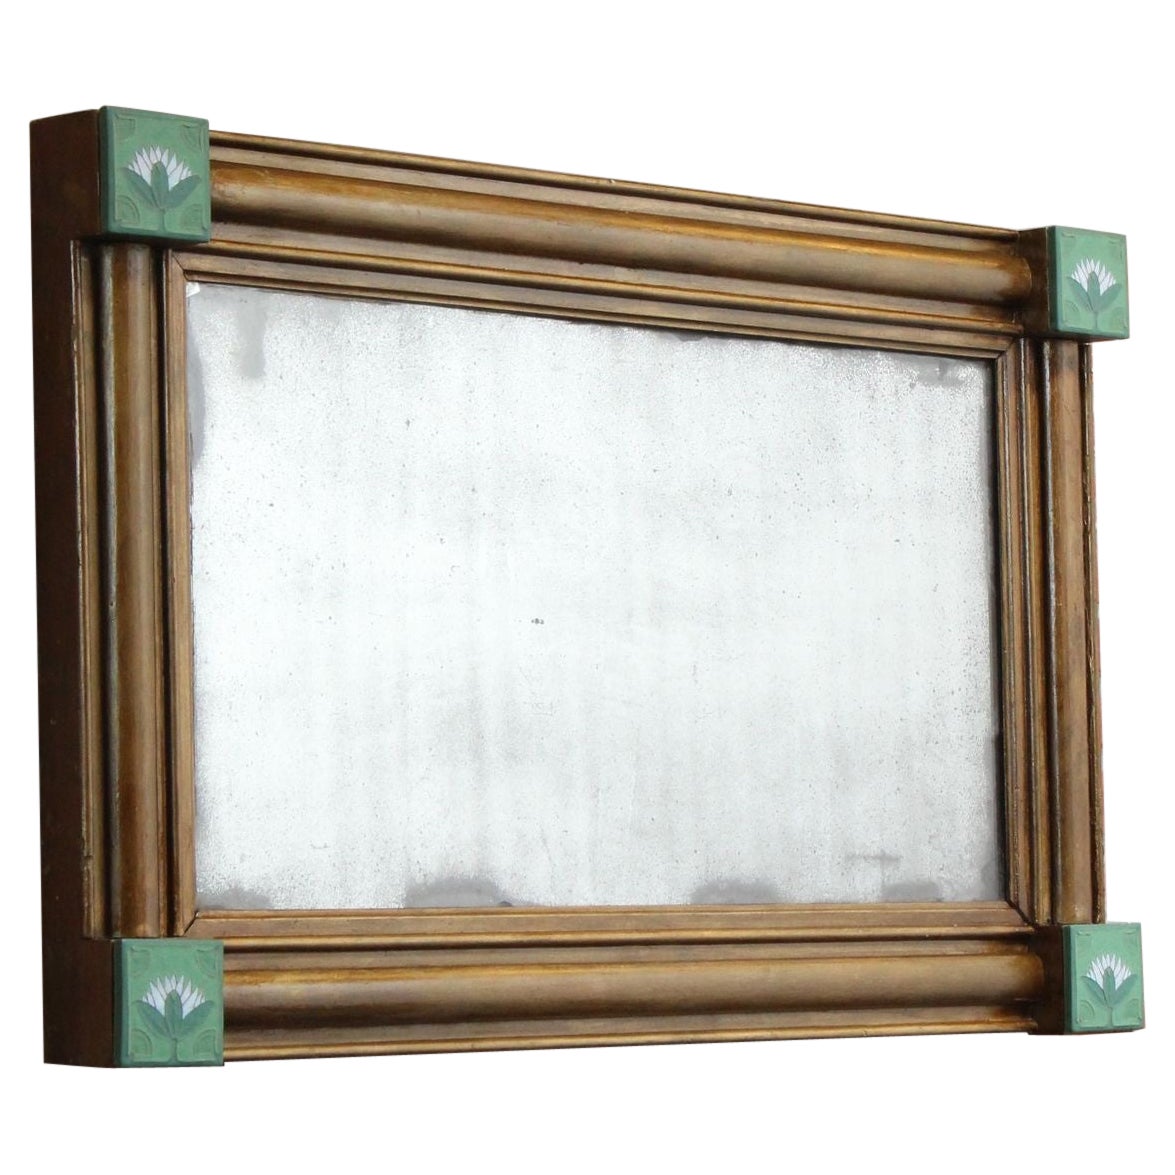 American Empire-Style Giltwood Mantle Mirror with "Lotus" Ceramic Tiles For Sale